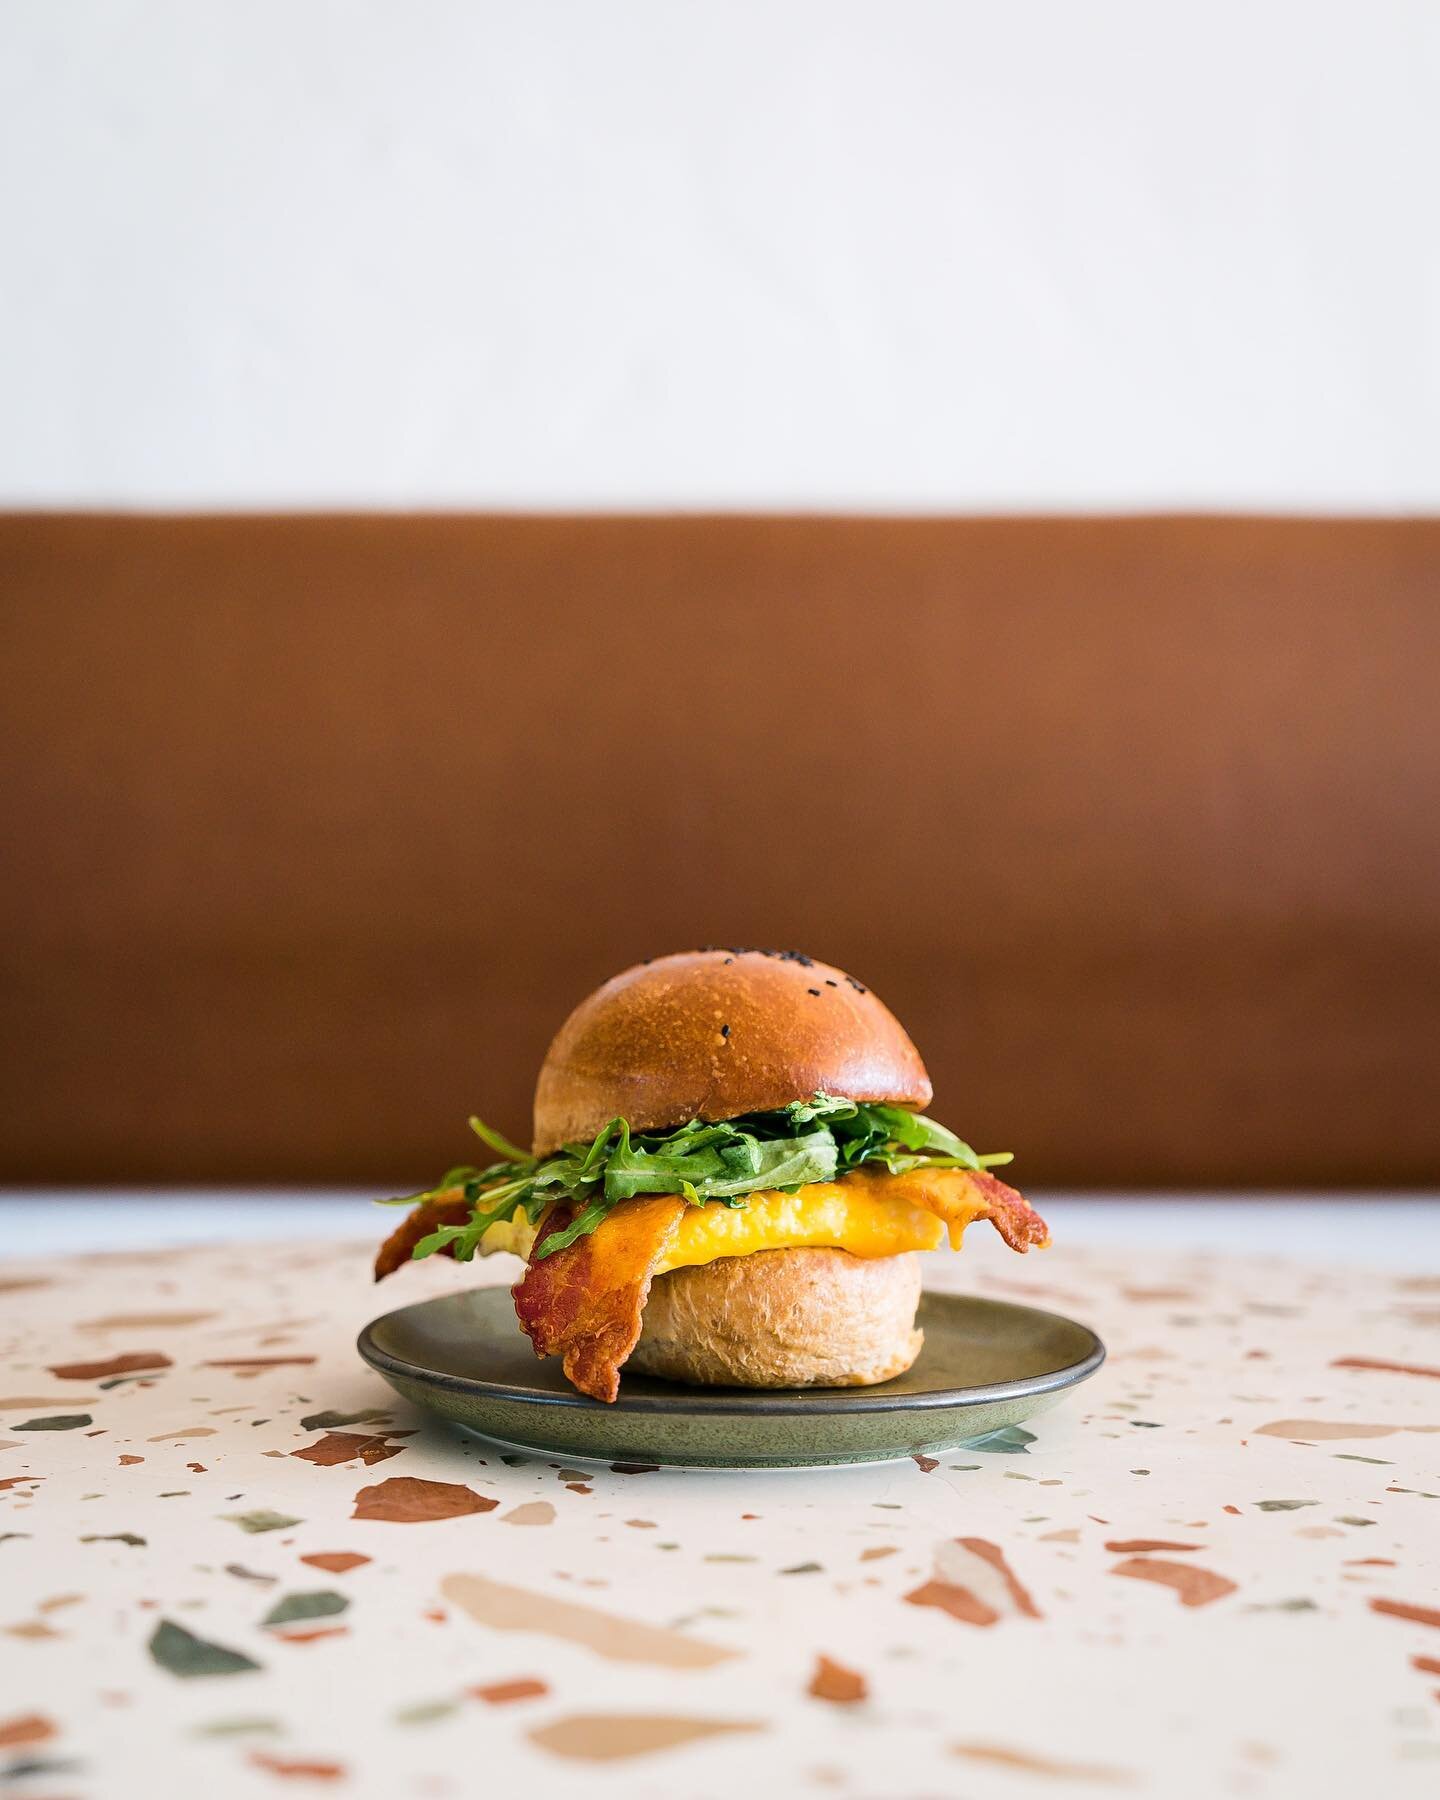 The NEW NEW on FRIDAY&rsquo;S. Ain&rsquo;t she cute? 8a until it&rsquo;s gone.

The Brekkie Sandwich &mdash;
Black sesame seed brioche bun + egg souffl&eacute; + secret sauce + sharp cheddar + arugula greens + add bacon, if you wanna.